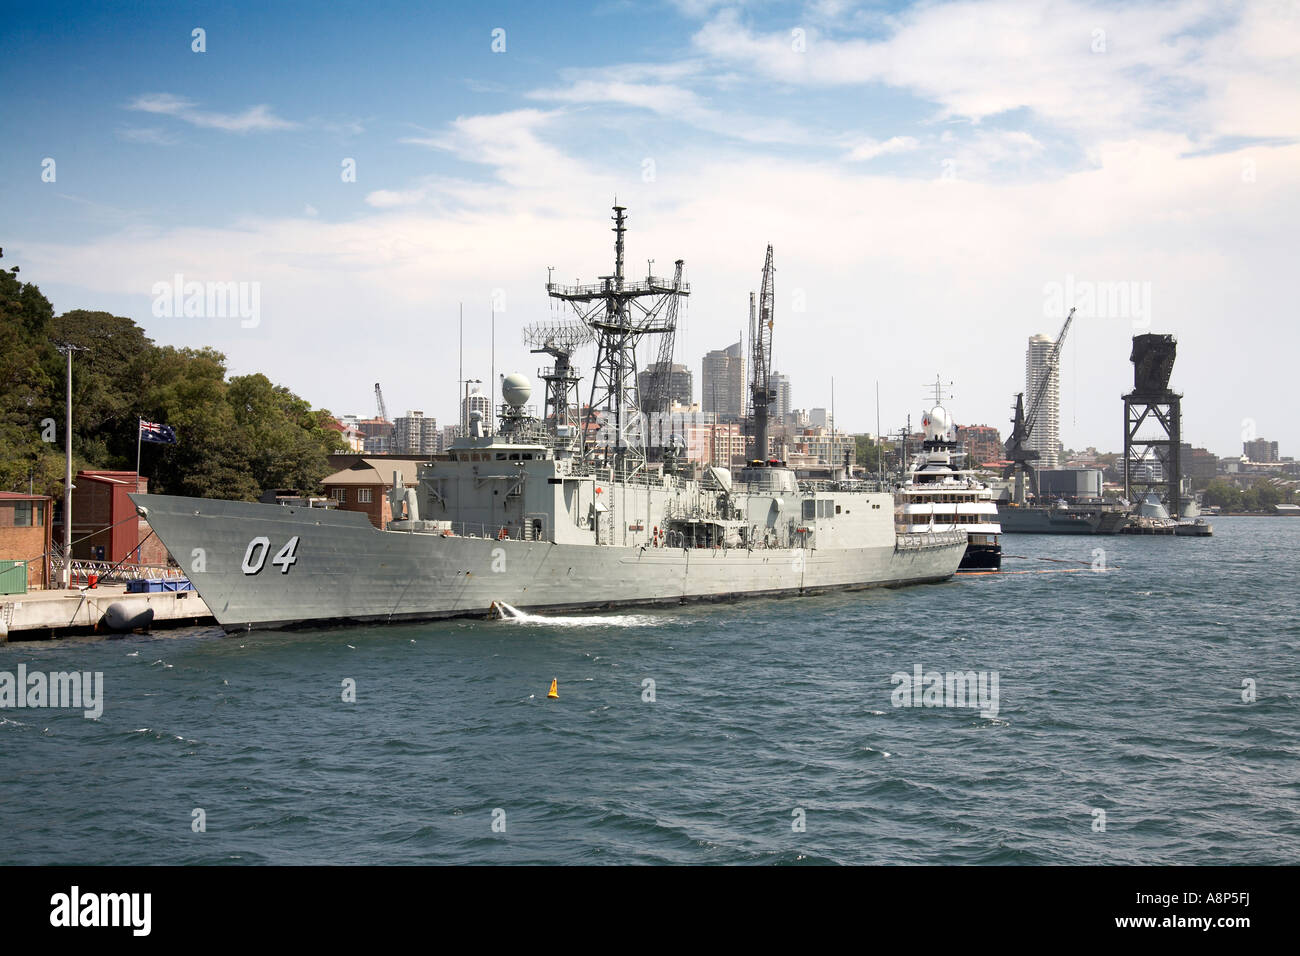 Garden Island RAN Naval base with warship cruiser yacht and crane in Sydney New South Wales NSW Australia Stock Photo